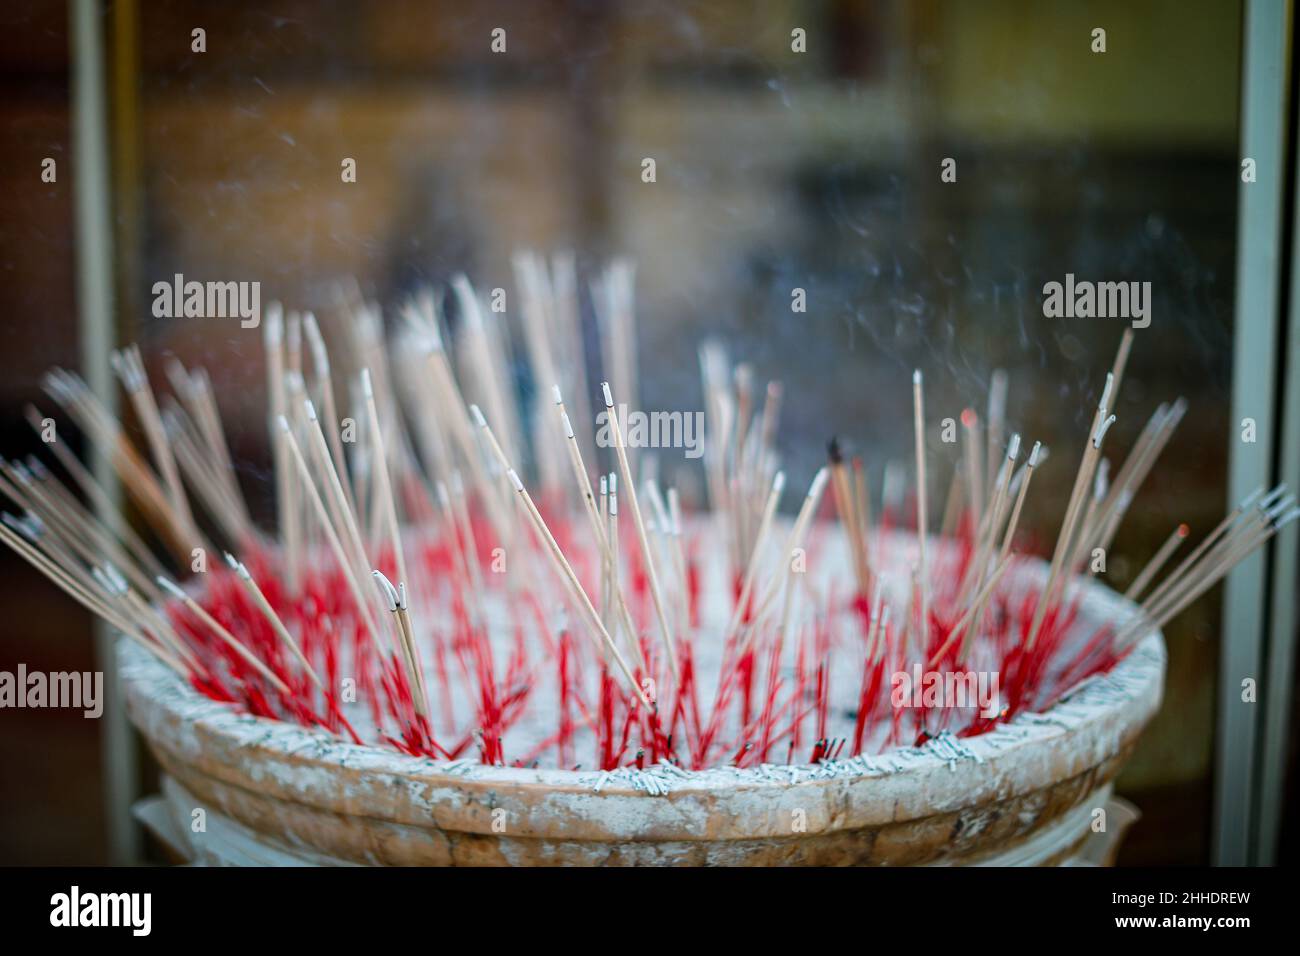 Soft focus on foreground of burning red and brown incenses making white smoke with blurry dark background inside sacred place. Stock Photo